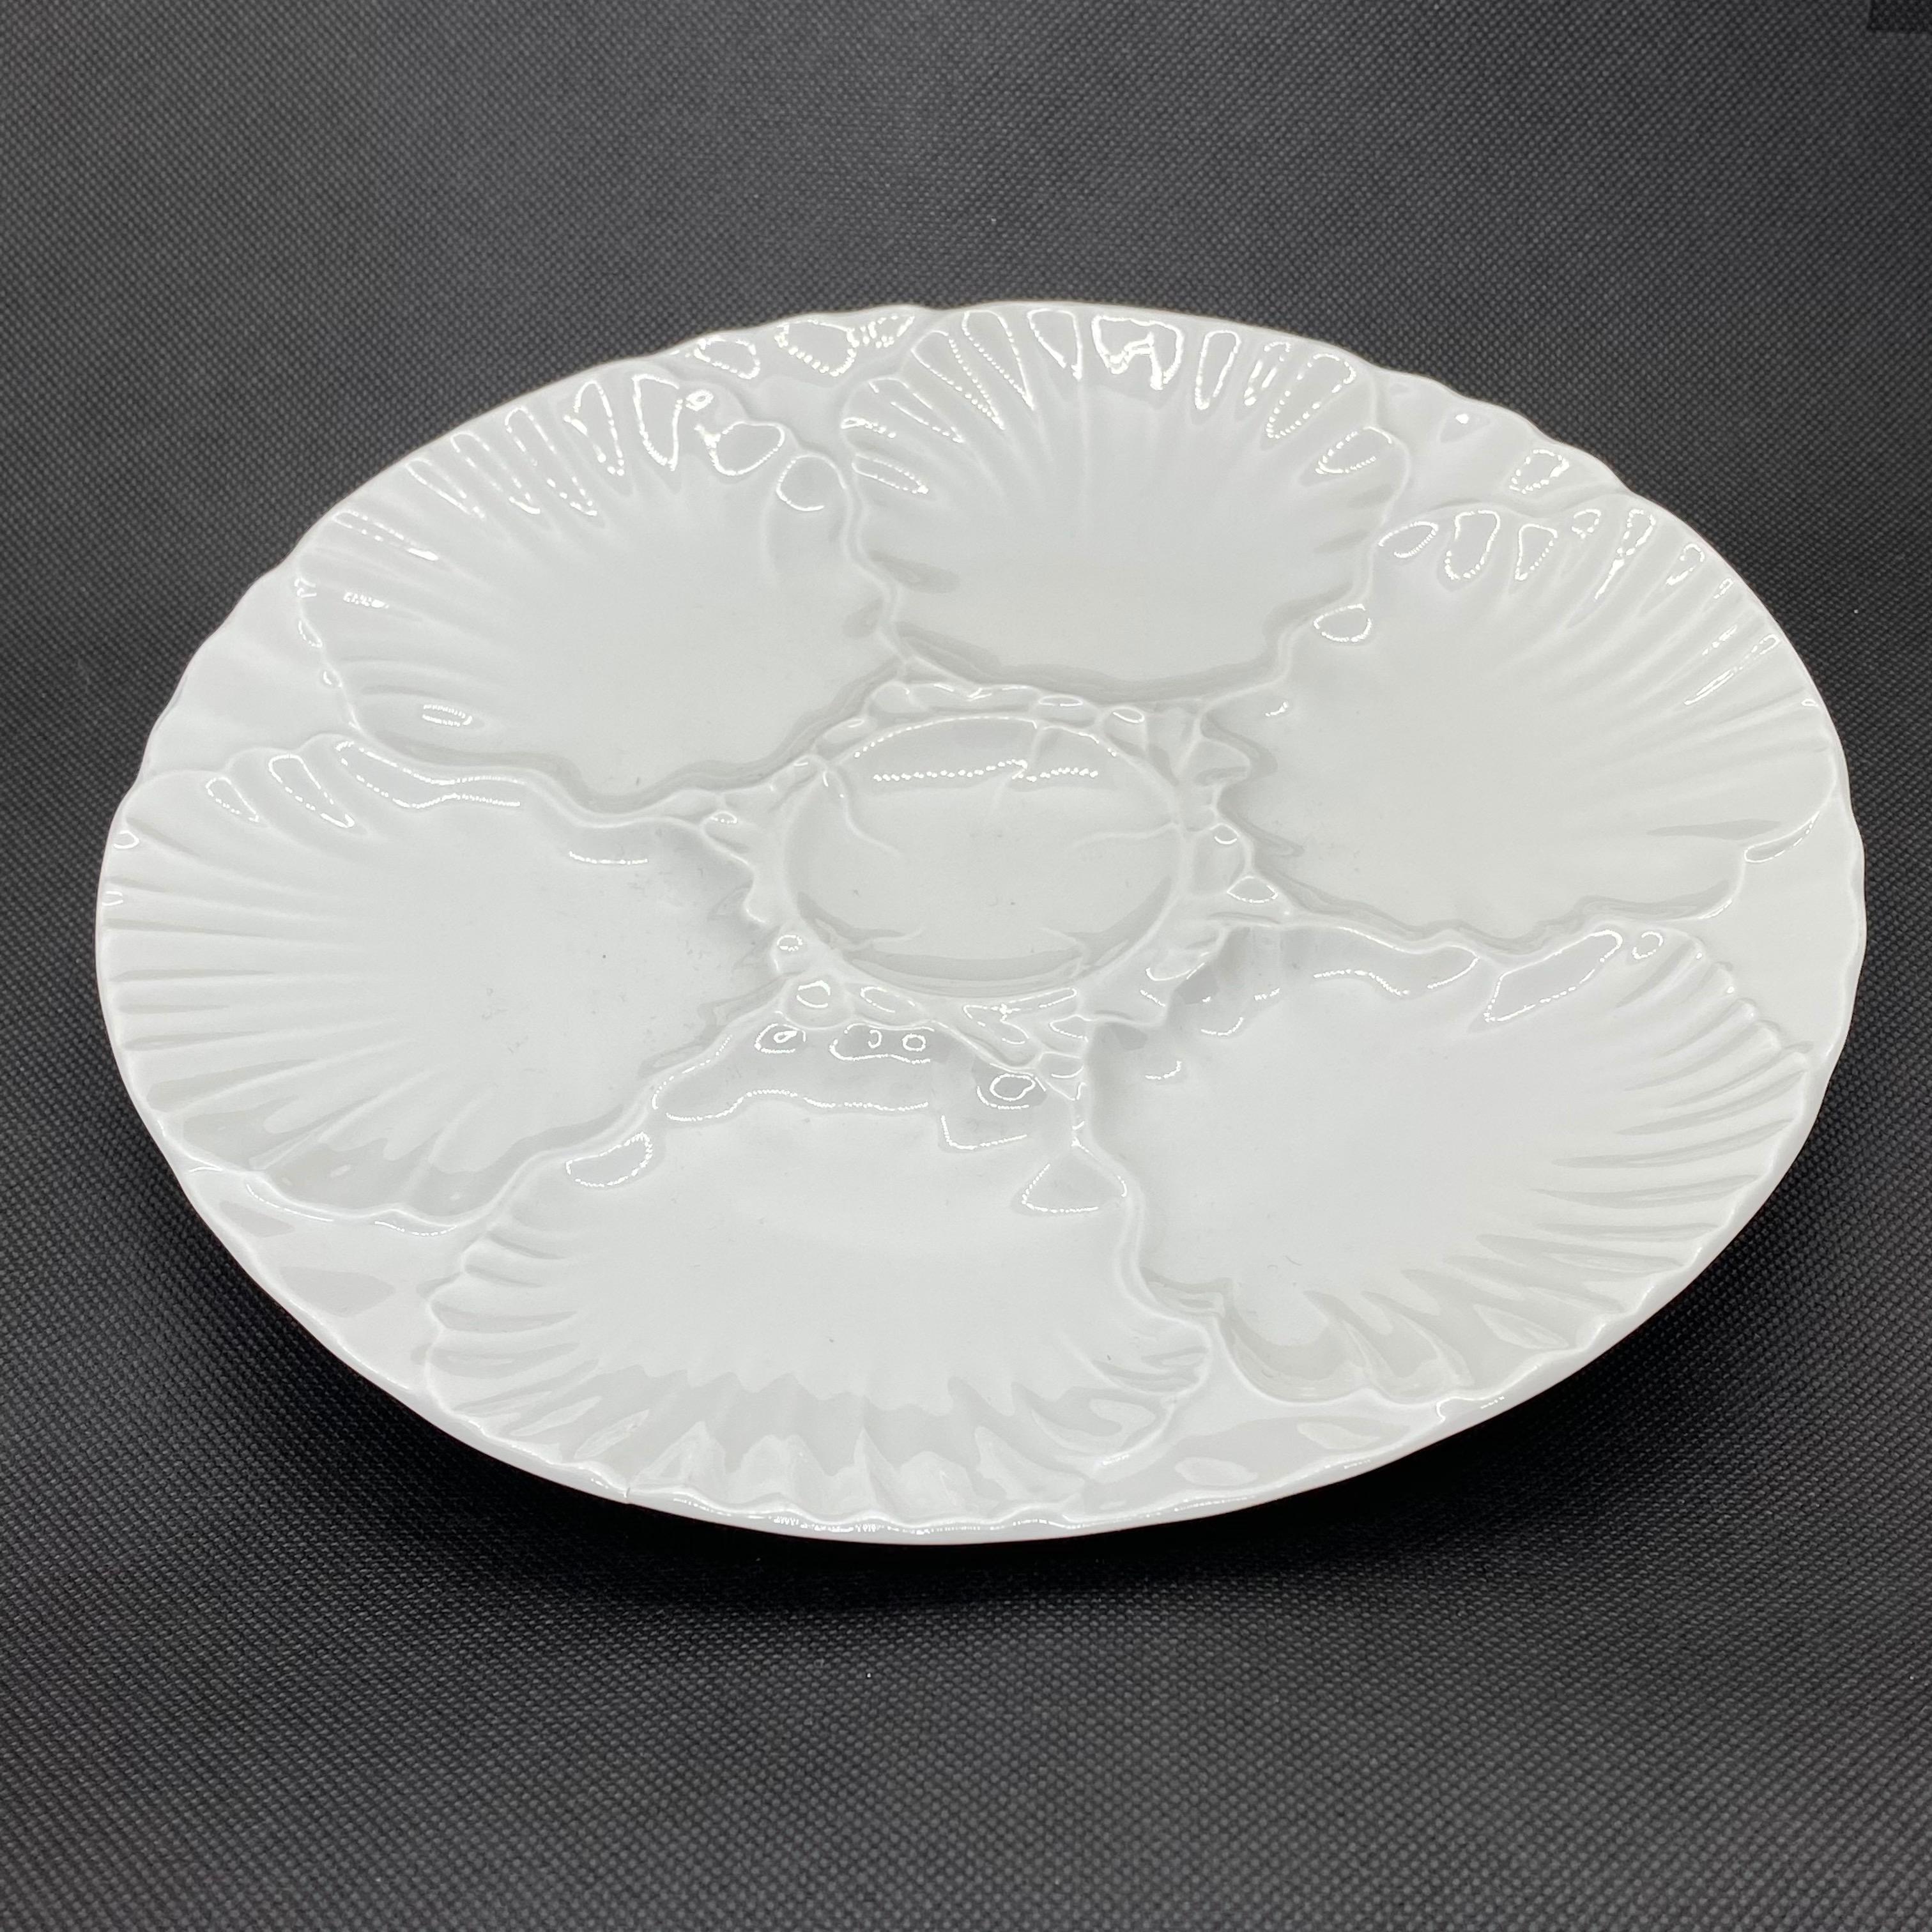 This beautiful oyster plate features 6 wells for oysters and one for the sauce or lemon. It is marked at the back with manufactory sign. Nice addition to your table or just to display. It has no chips, cracks or repairs.